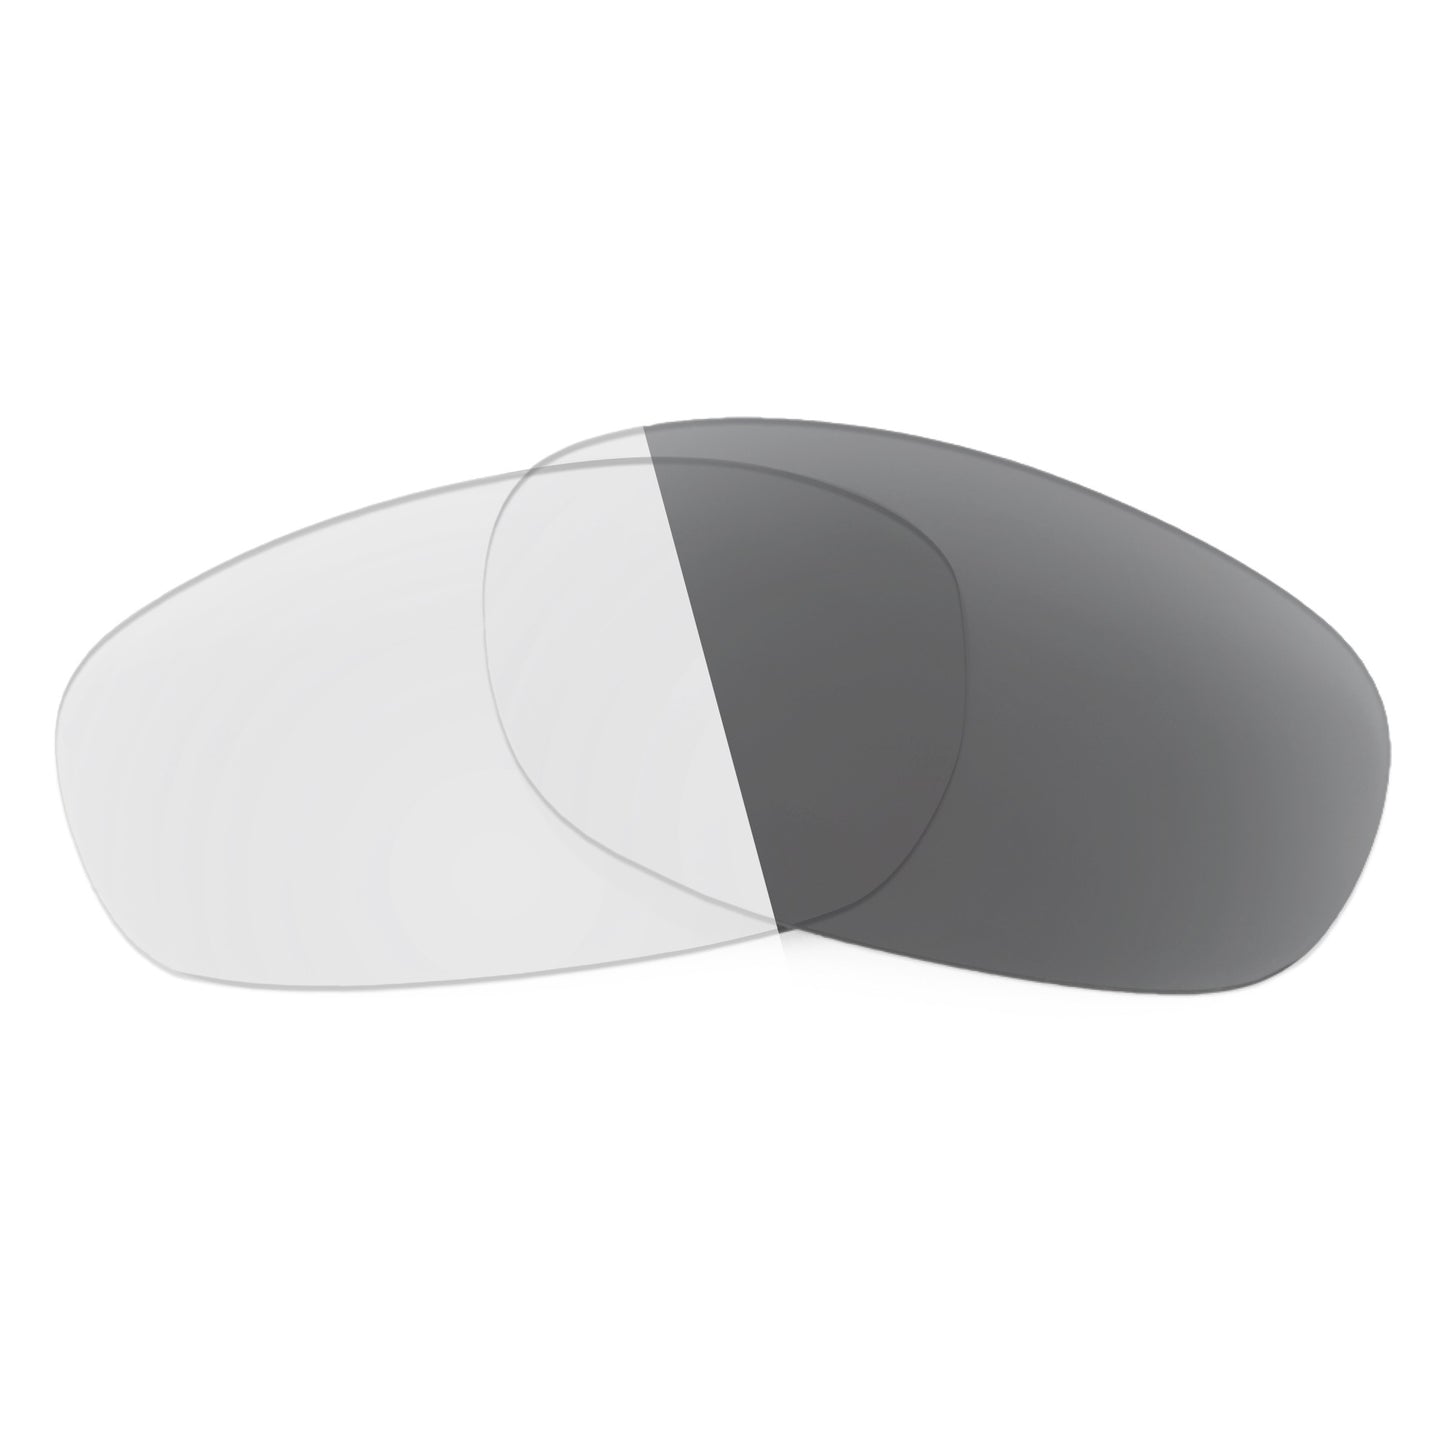 Revant replacement lenses for Ray-Ban RB3445 61mm Non-Polarized Adapt Gray Photochromic